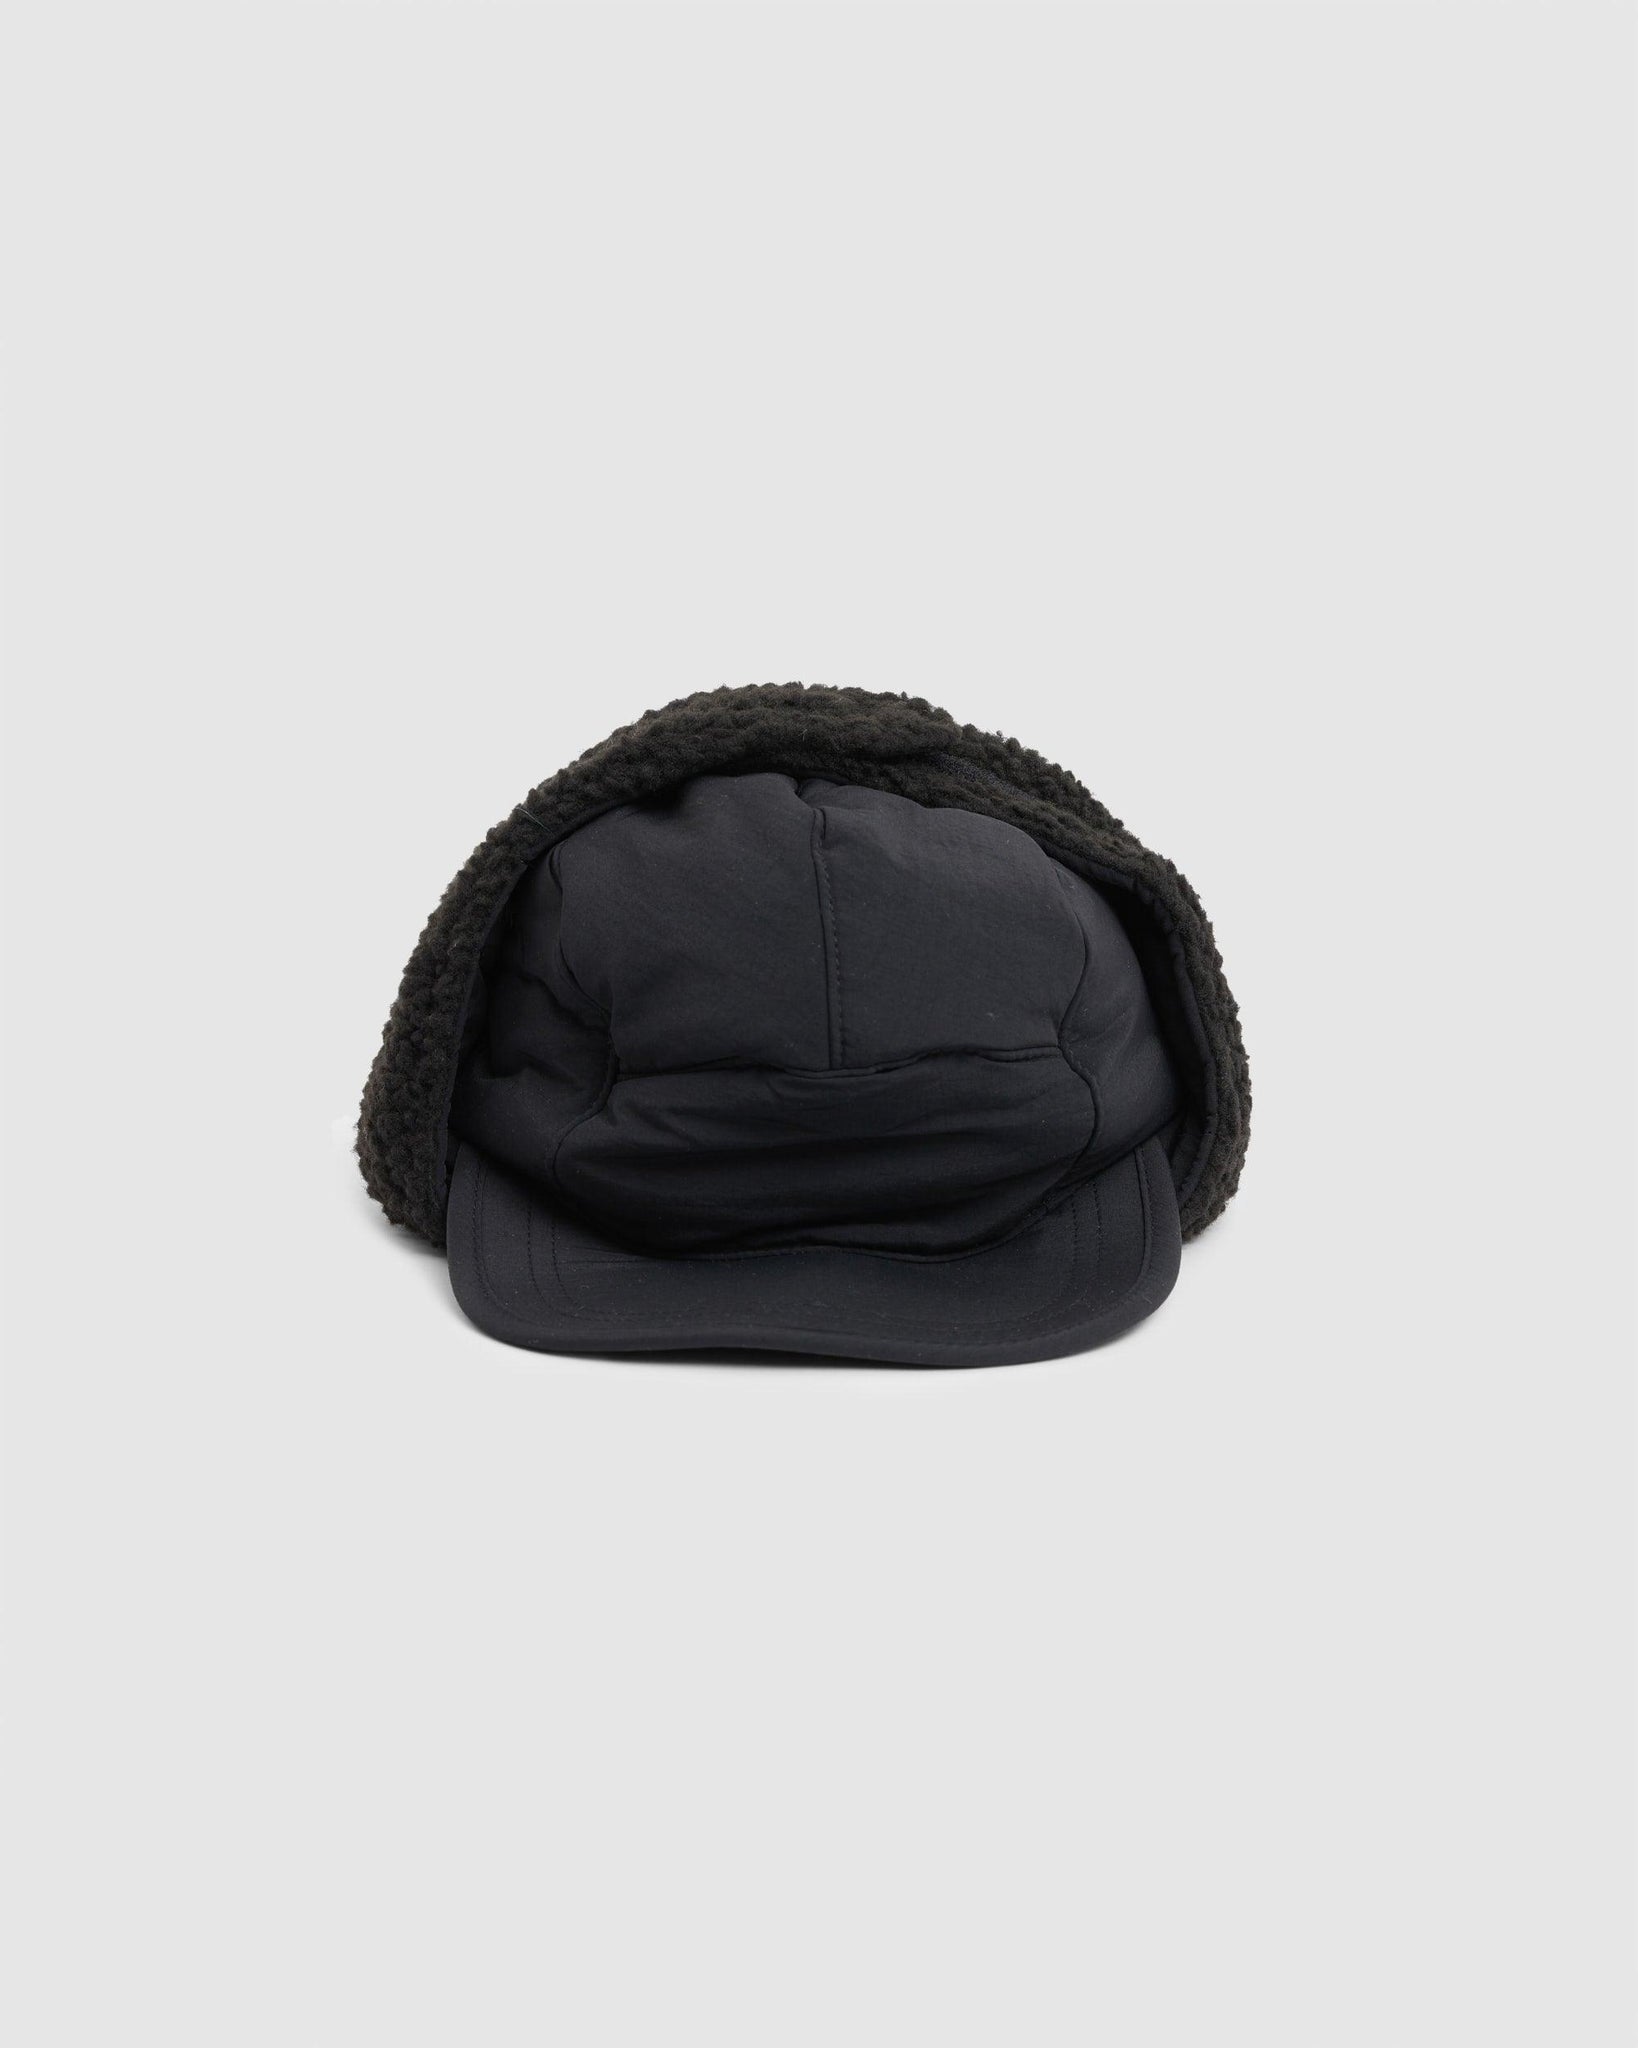 Winter Cap Black - {{ collection.title }} - Chinatown Country Club 